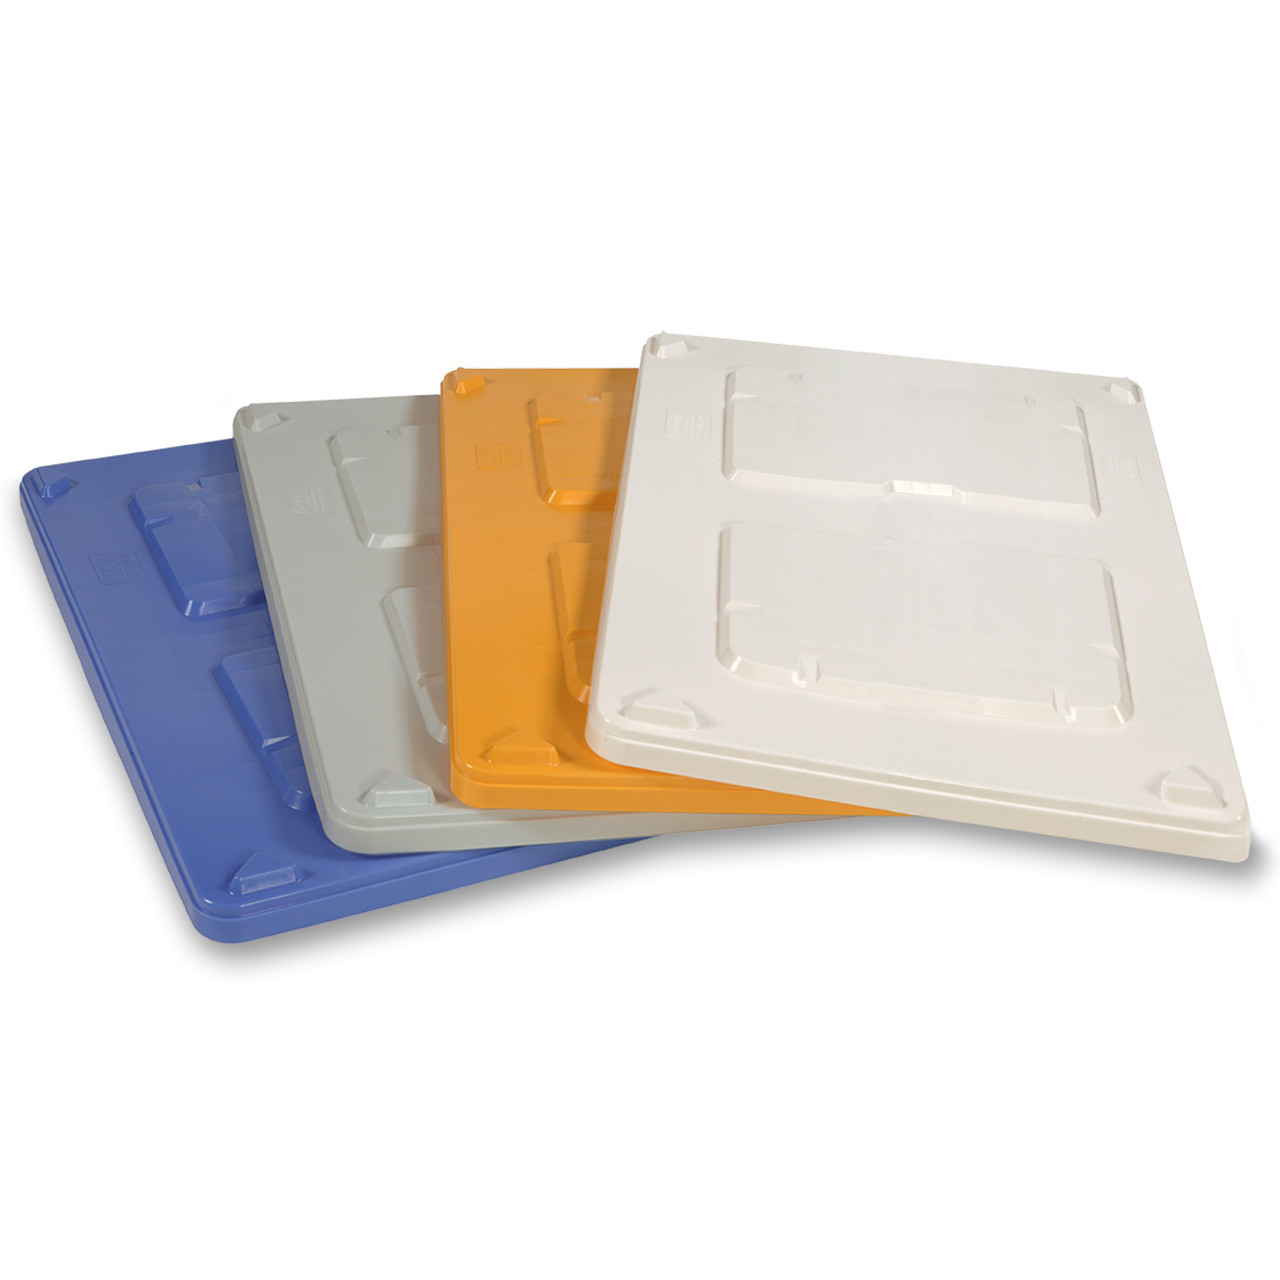 Lids for the MACX containers